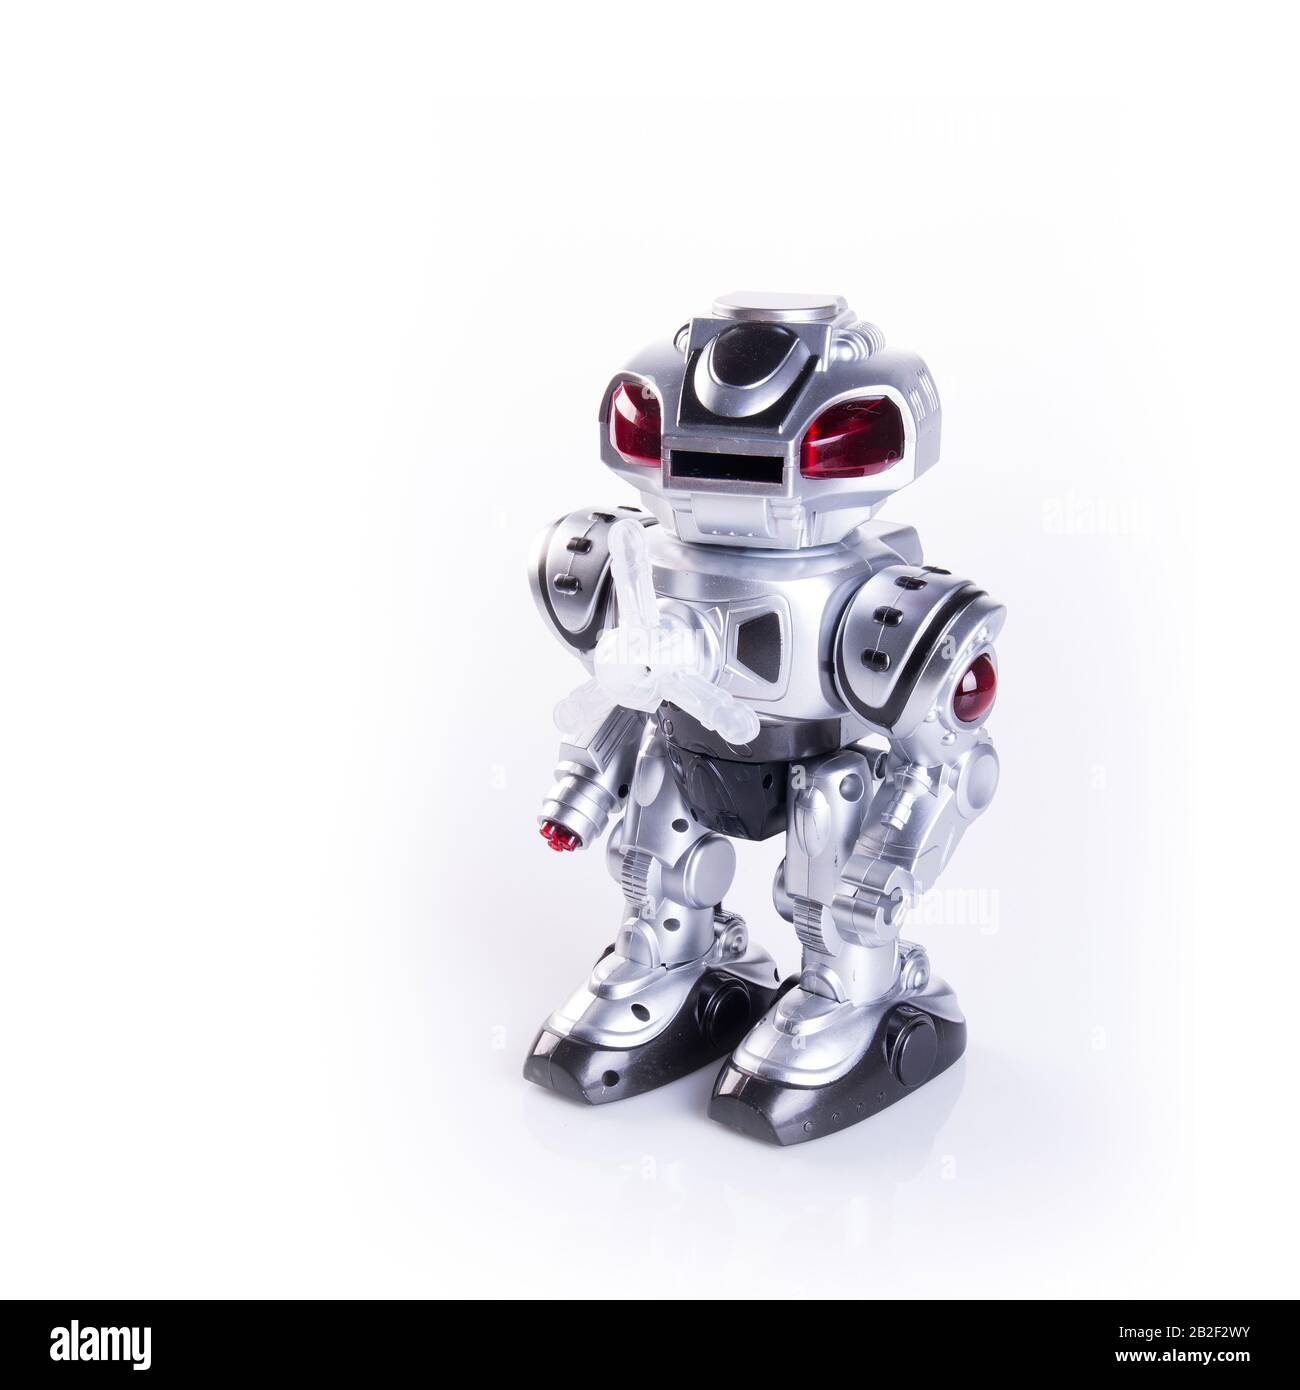 Toy or robot toys with concept on the background new Stock Photo